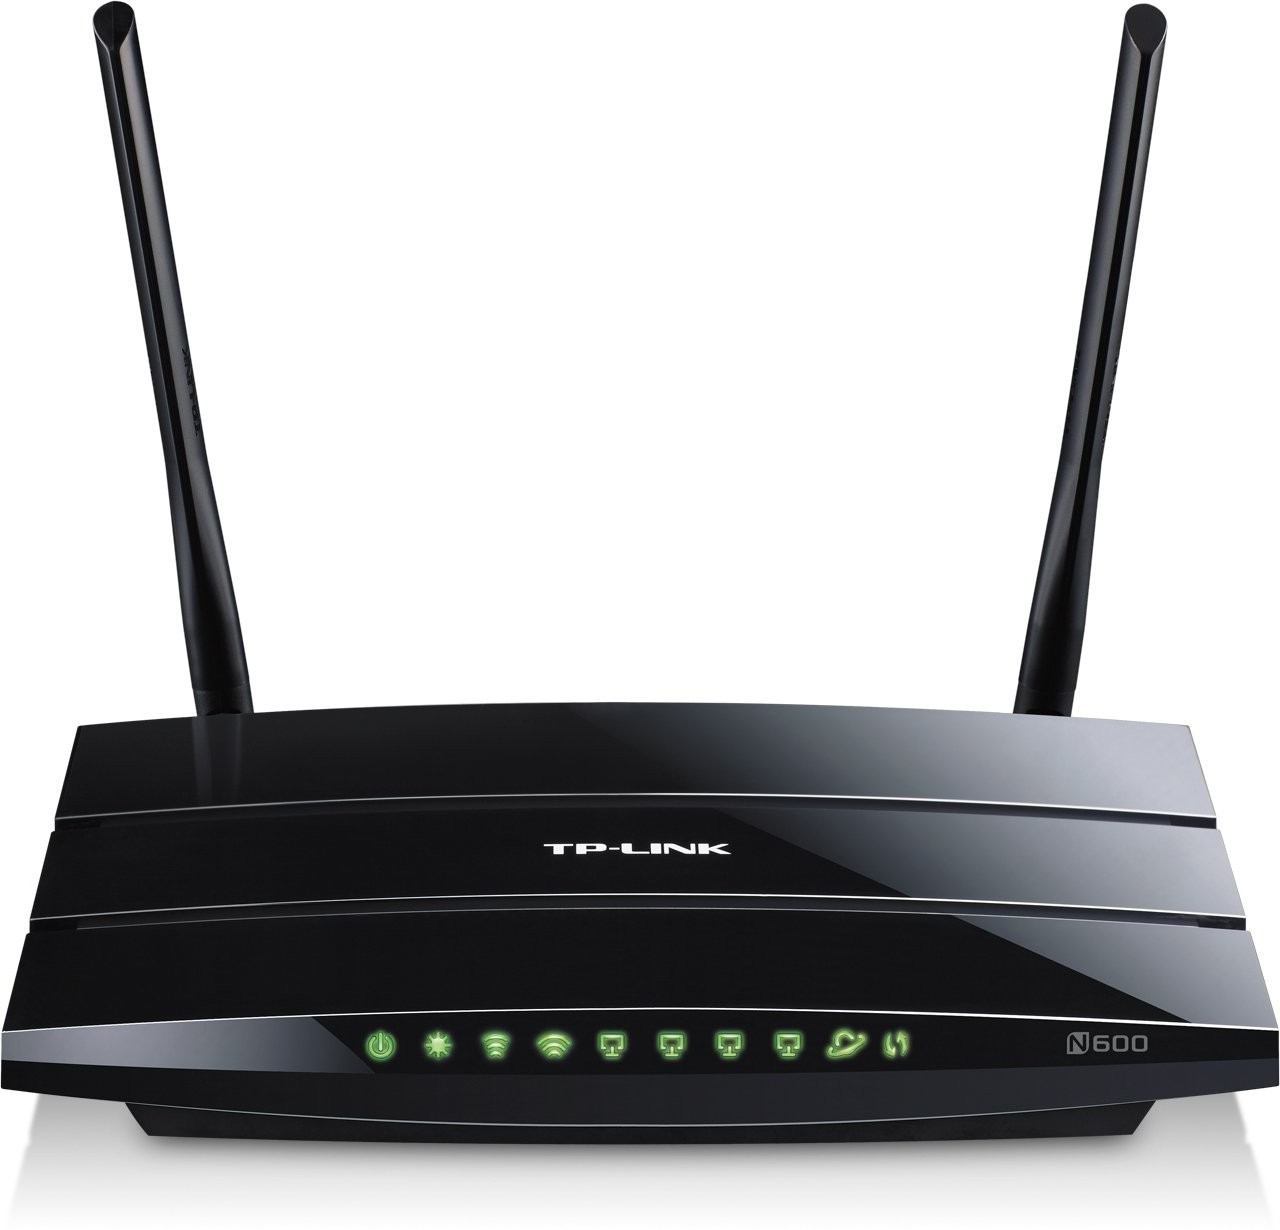 ASUS RT-N600 Wireless Router - 600 Mbps - 2.4 GHz / 5 GHz - 802.11b/a/g/n